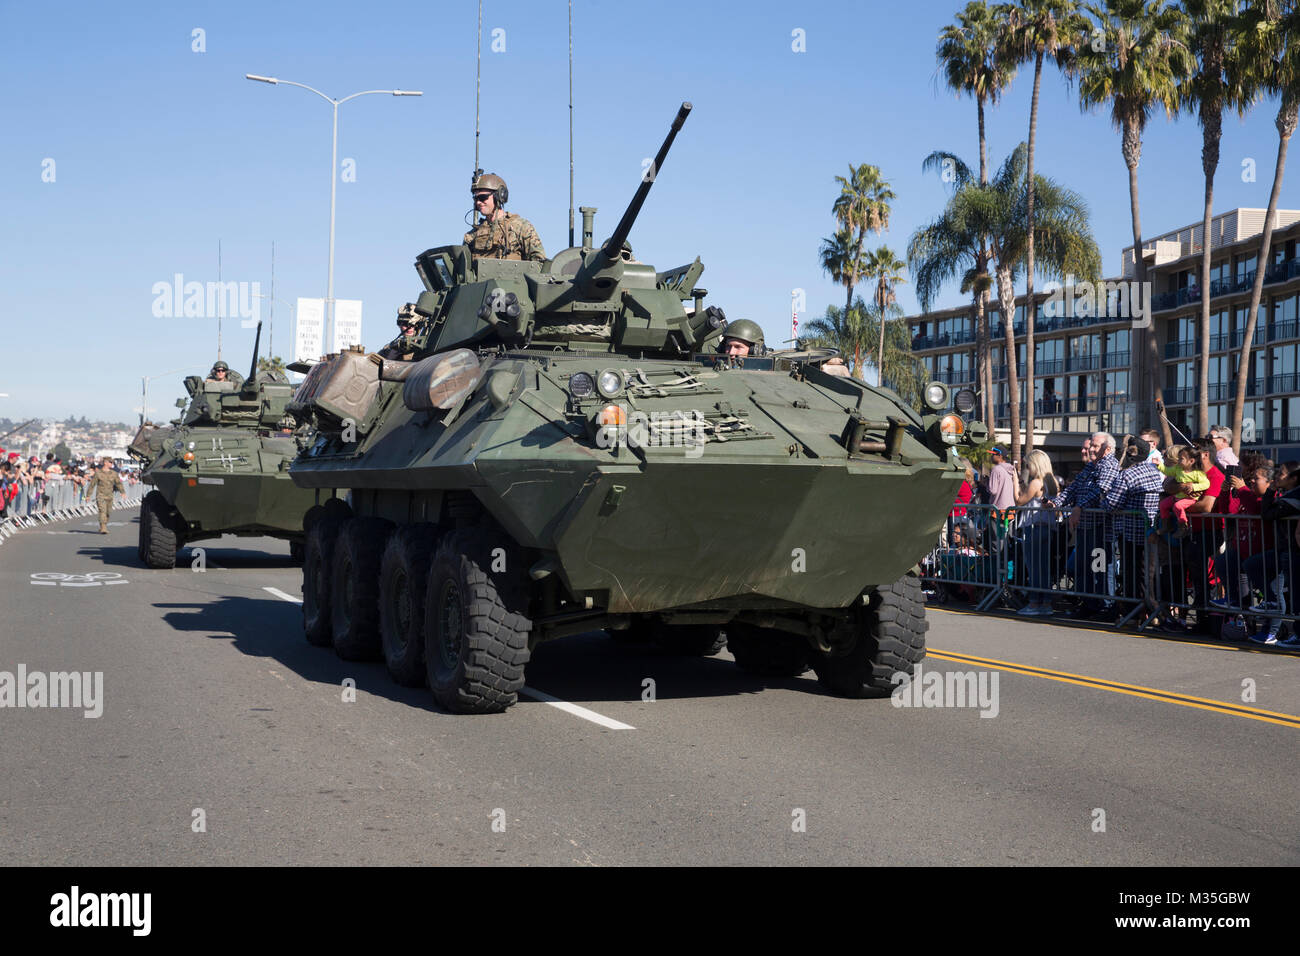 SAN DIEGO, Calif. – Marines with I Marine Expeditionary Force drive light armored vehicles by cheering crowds during the San Diego County Credit Union Holiday Bowl Parade, in San Diego, Dec. 28, 2017. In 2017, I MEF Marines and Sailors supported more than 140 community events. (U.S. Marine Corps photo by Lance Cpl. Cutler Brice) Stock Photo